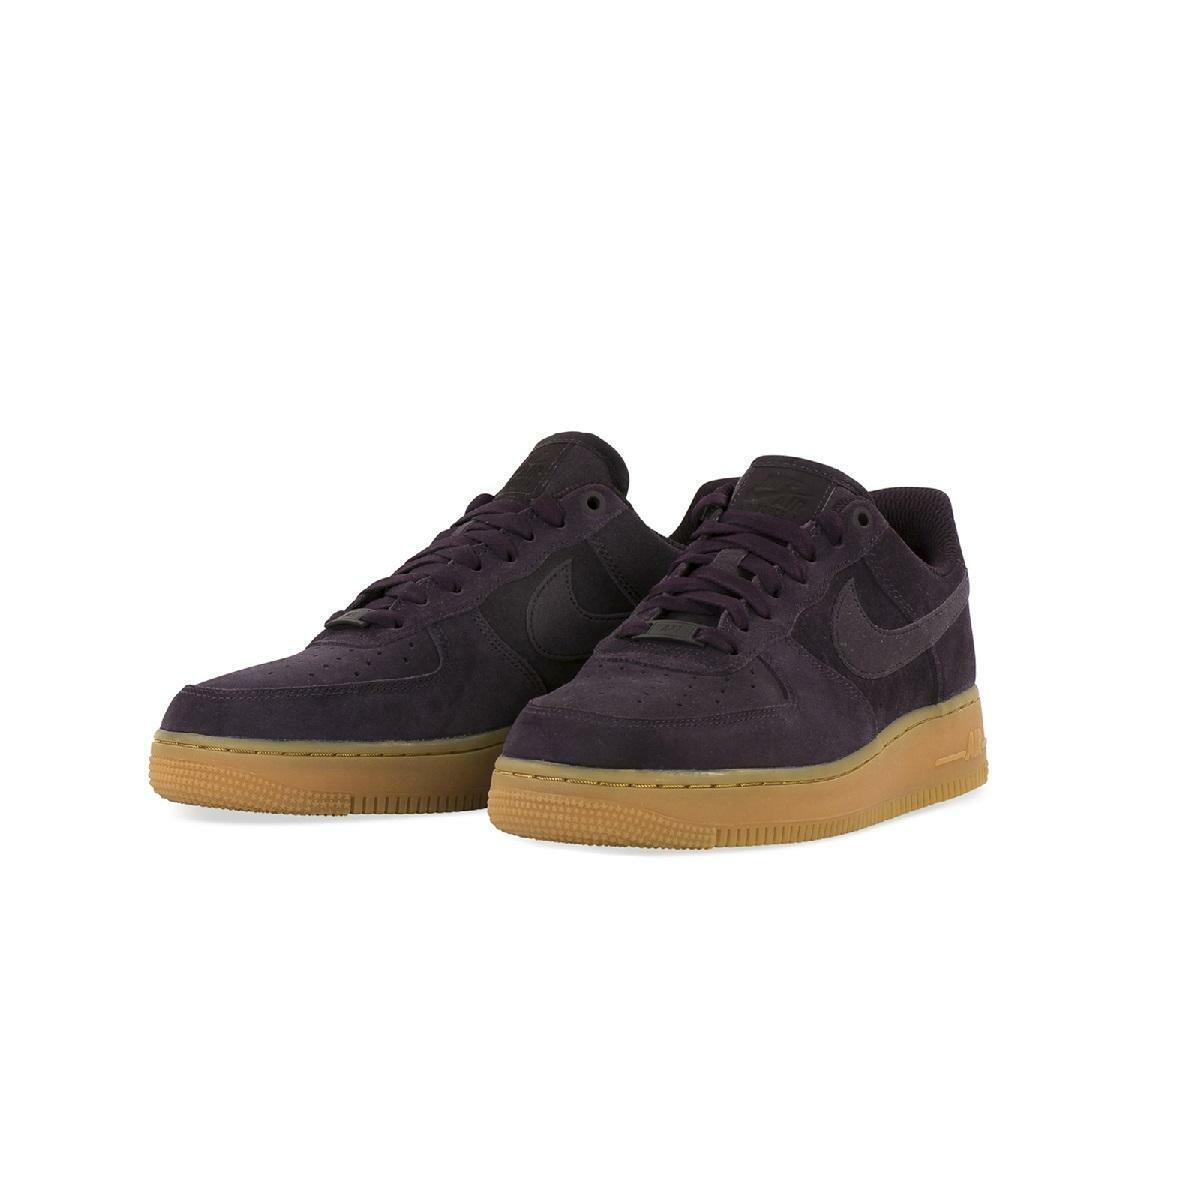 Womens NIKE AIR FORCE 1 07 SE Trainers 896184 602